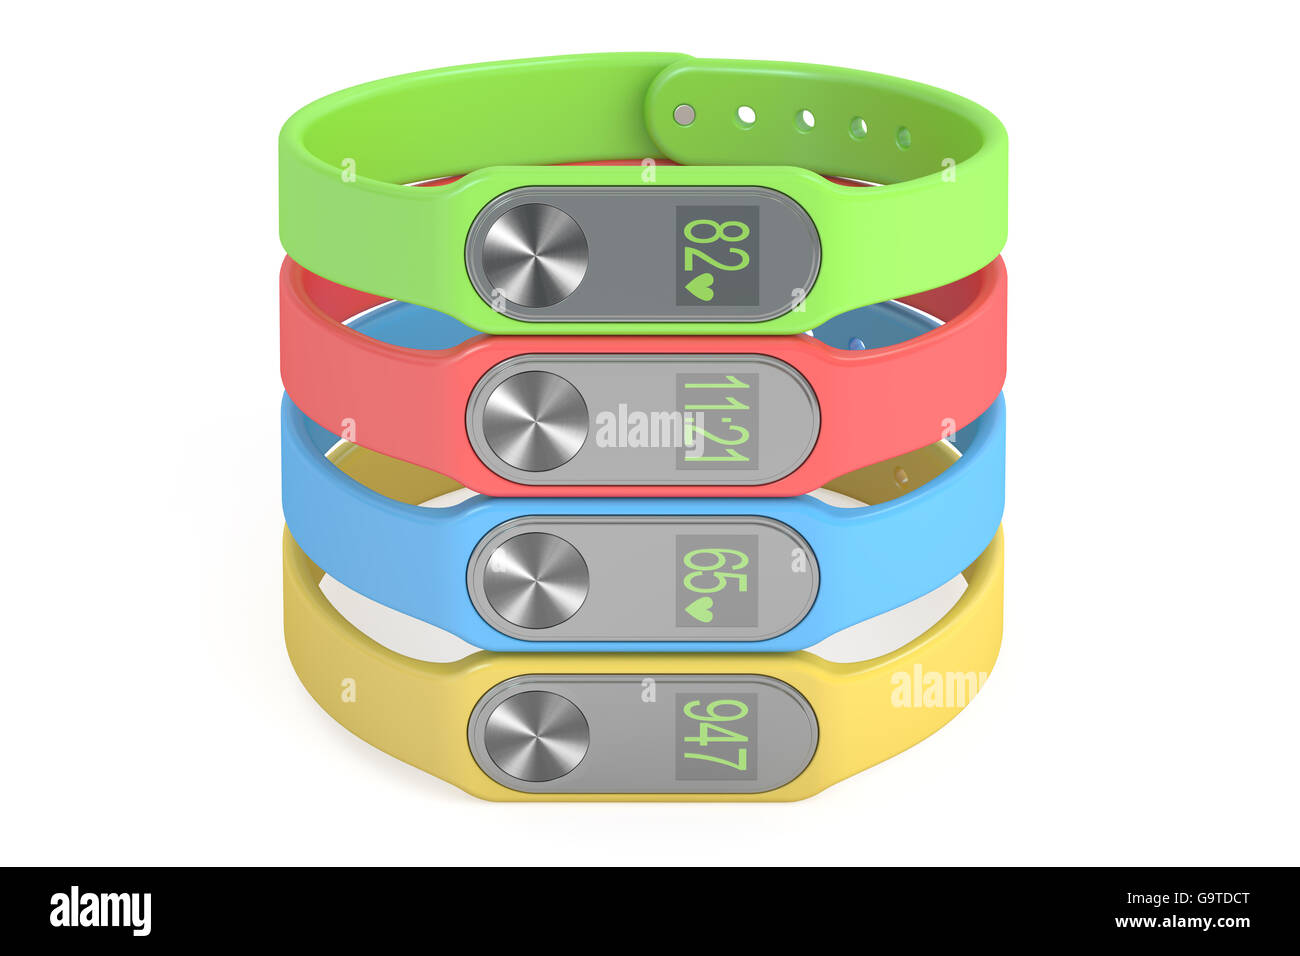 set of colored activity trackers or fitness bracelets, 3D rendering isolated on white background Stock Photo